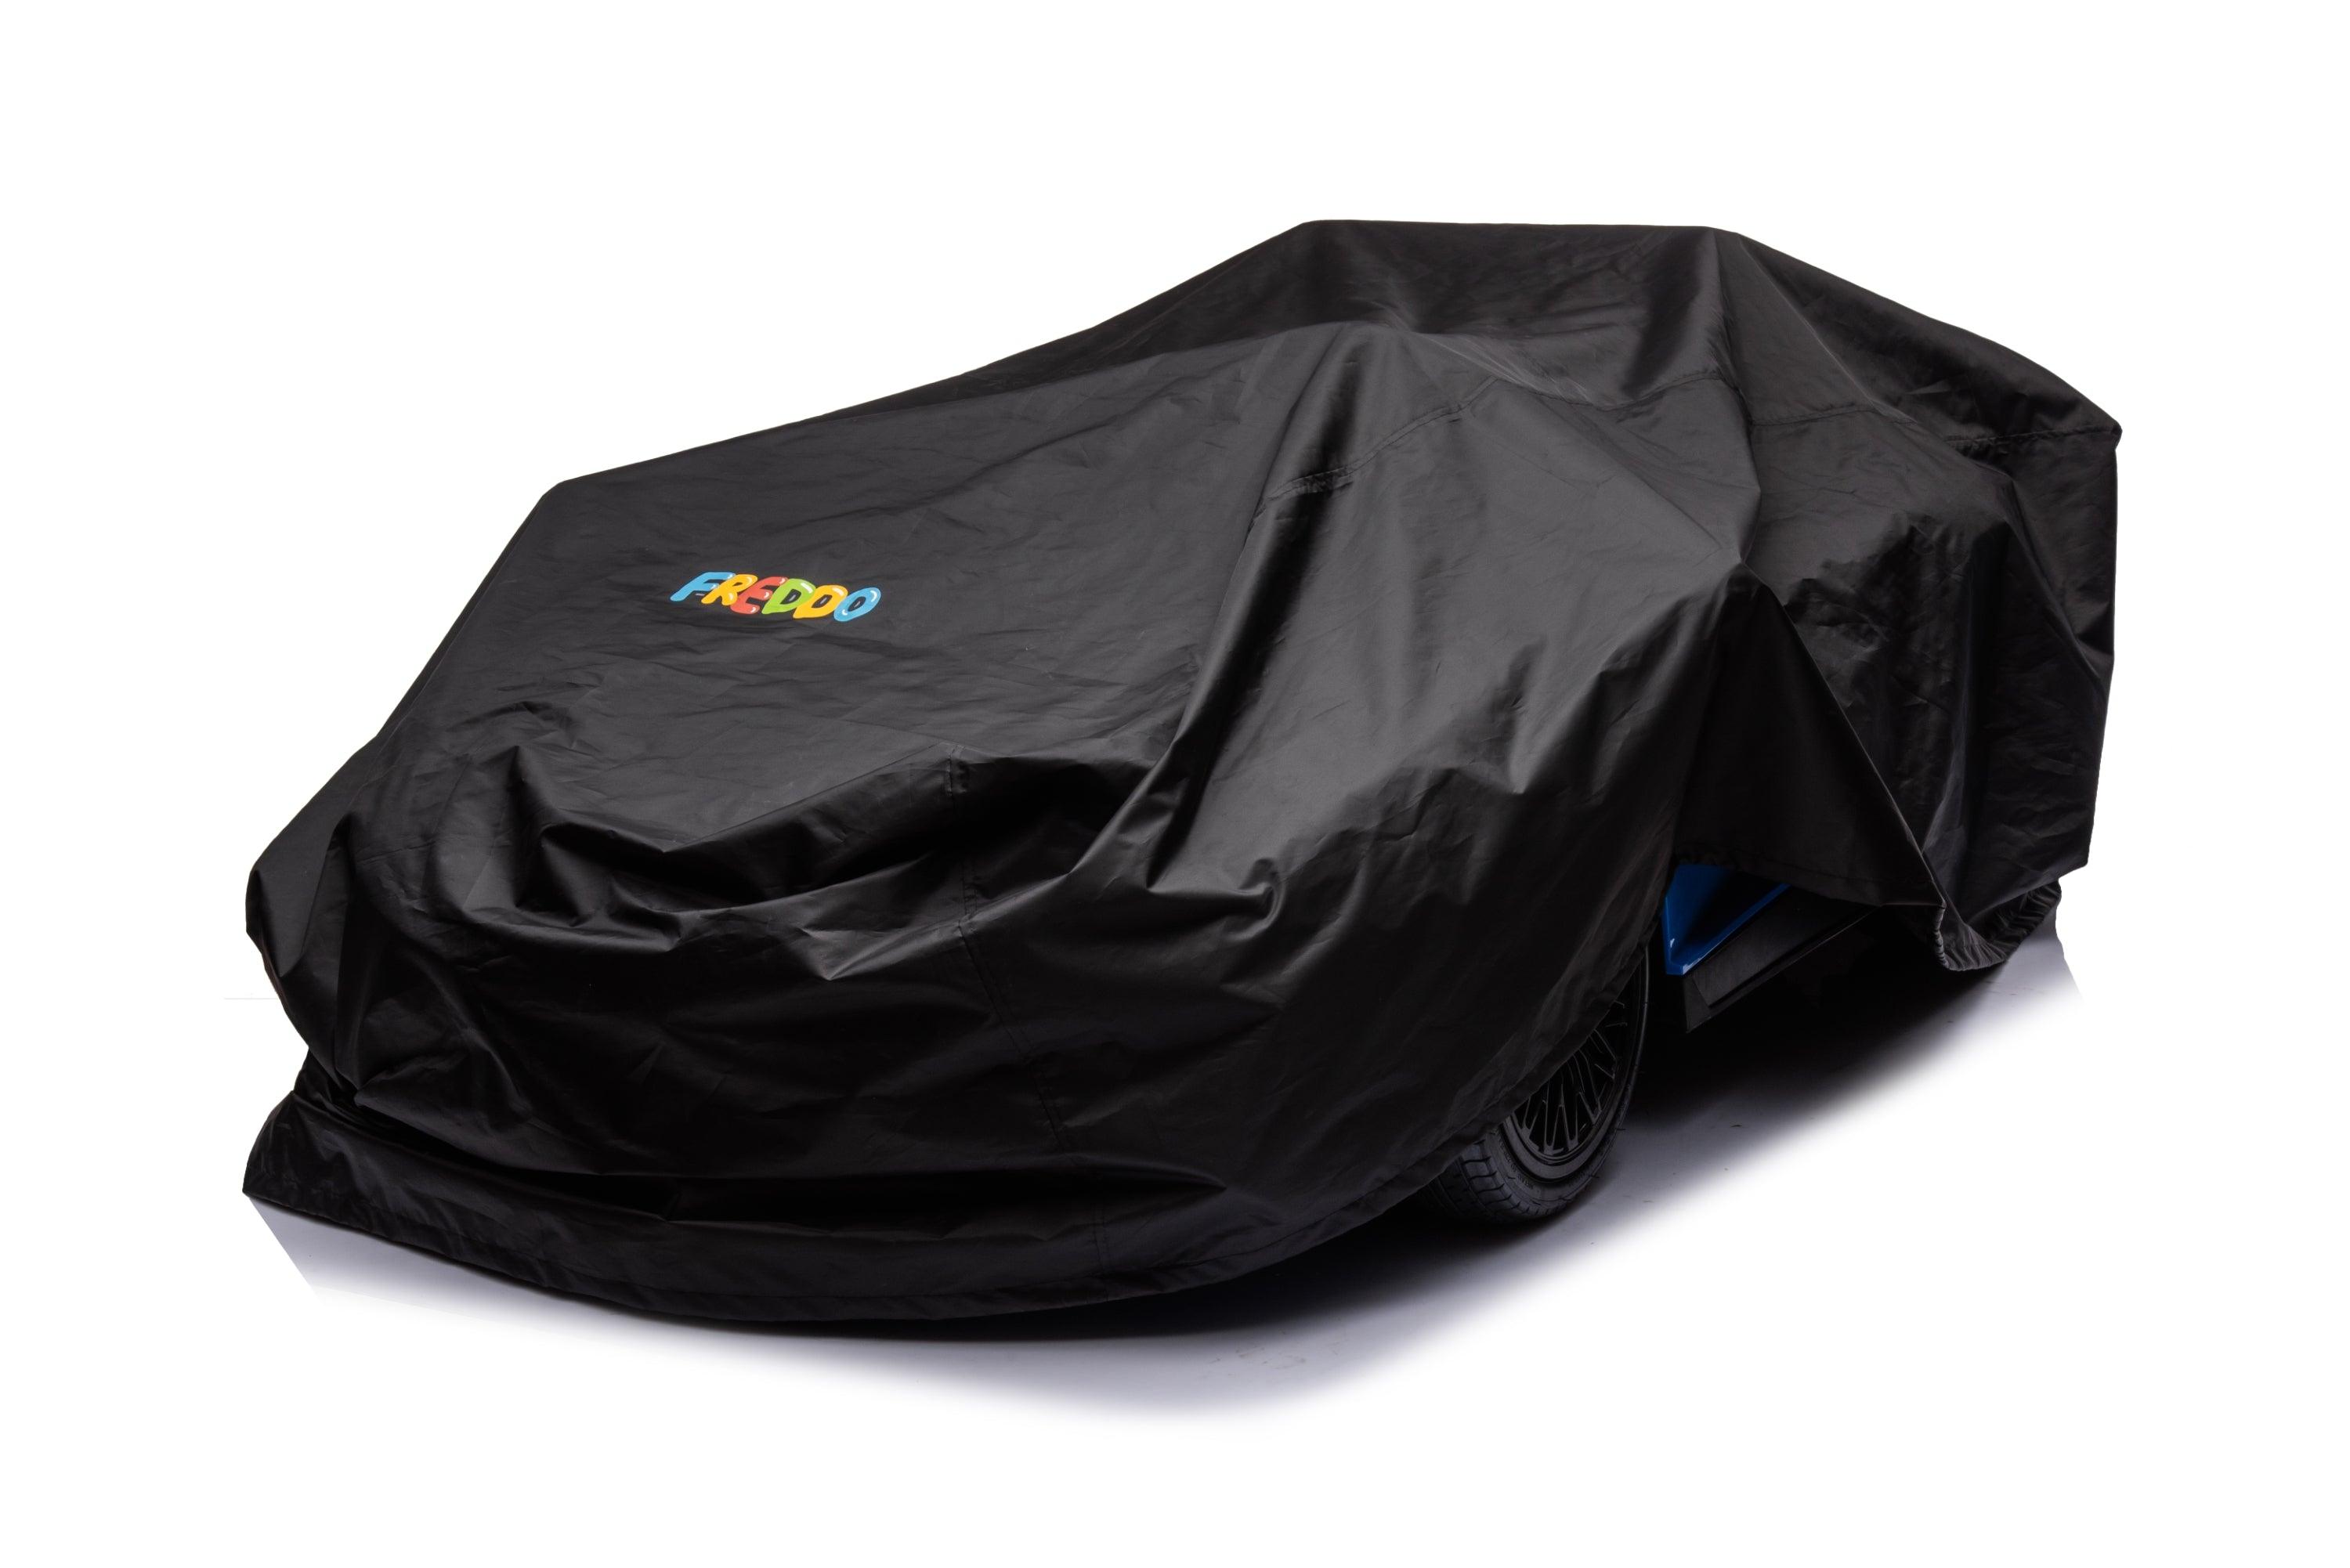 Ride on car Covers. A shield against rain, sun, dust, snow, and leaves